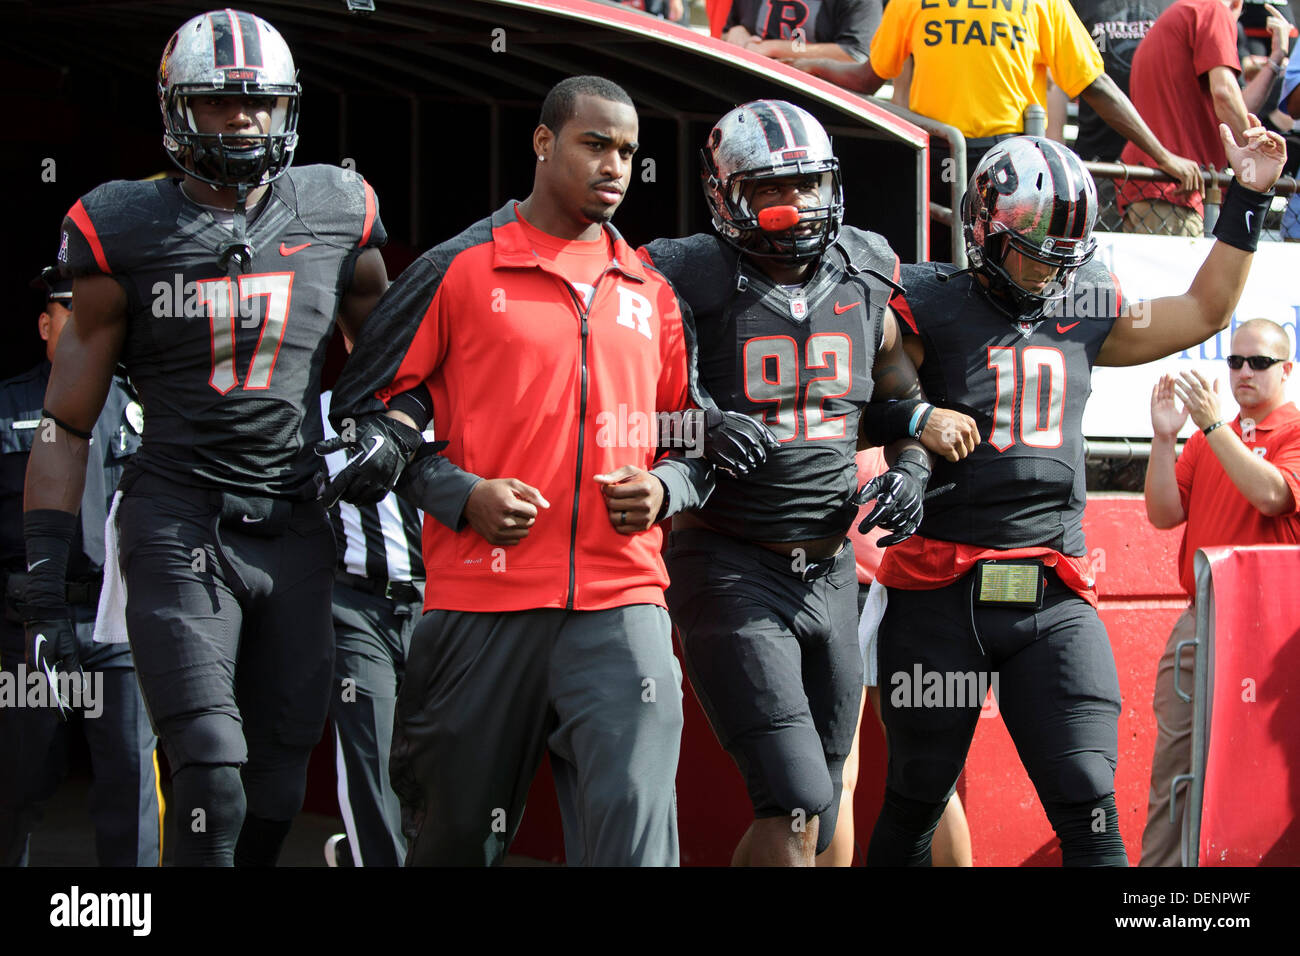 Piscataway, New Jersey, USA. 21st Sep, 2013. September 21, 2013: Rutgers Scarlet Knights quarterback Gary Nova (10), Rutgers Scarlet Knights defensive lineman Jamil Merrell (92), and Rutgers Scarlet Knights wide receiver Brandon Coleman (17) enter the field during the game between Arkansas Razorbacks and Rutgers Scarlet Knights at Highpoint Solutions Stadium in Piscataway, NJ. Rutgers Scarlet Knights defeated The Arkansas Razorbacks 28-24. © csm/Alamy Live News Stock Photo